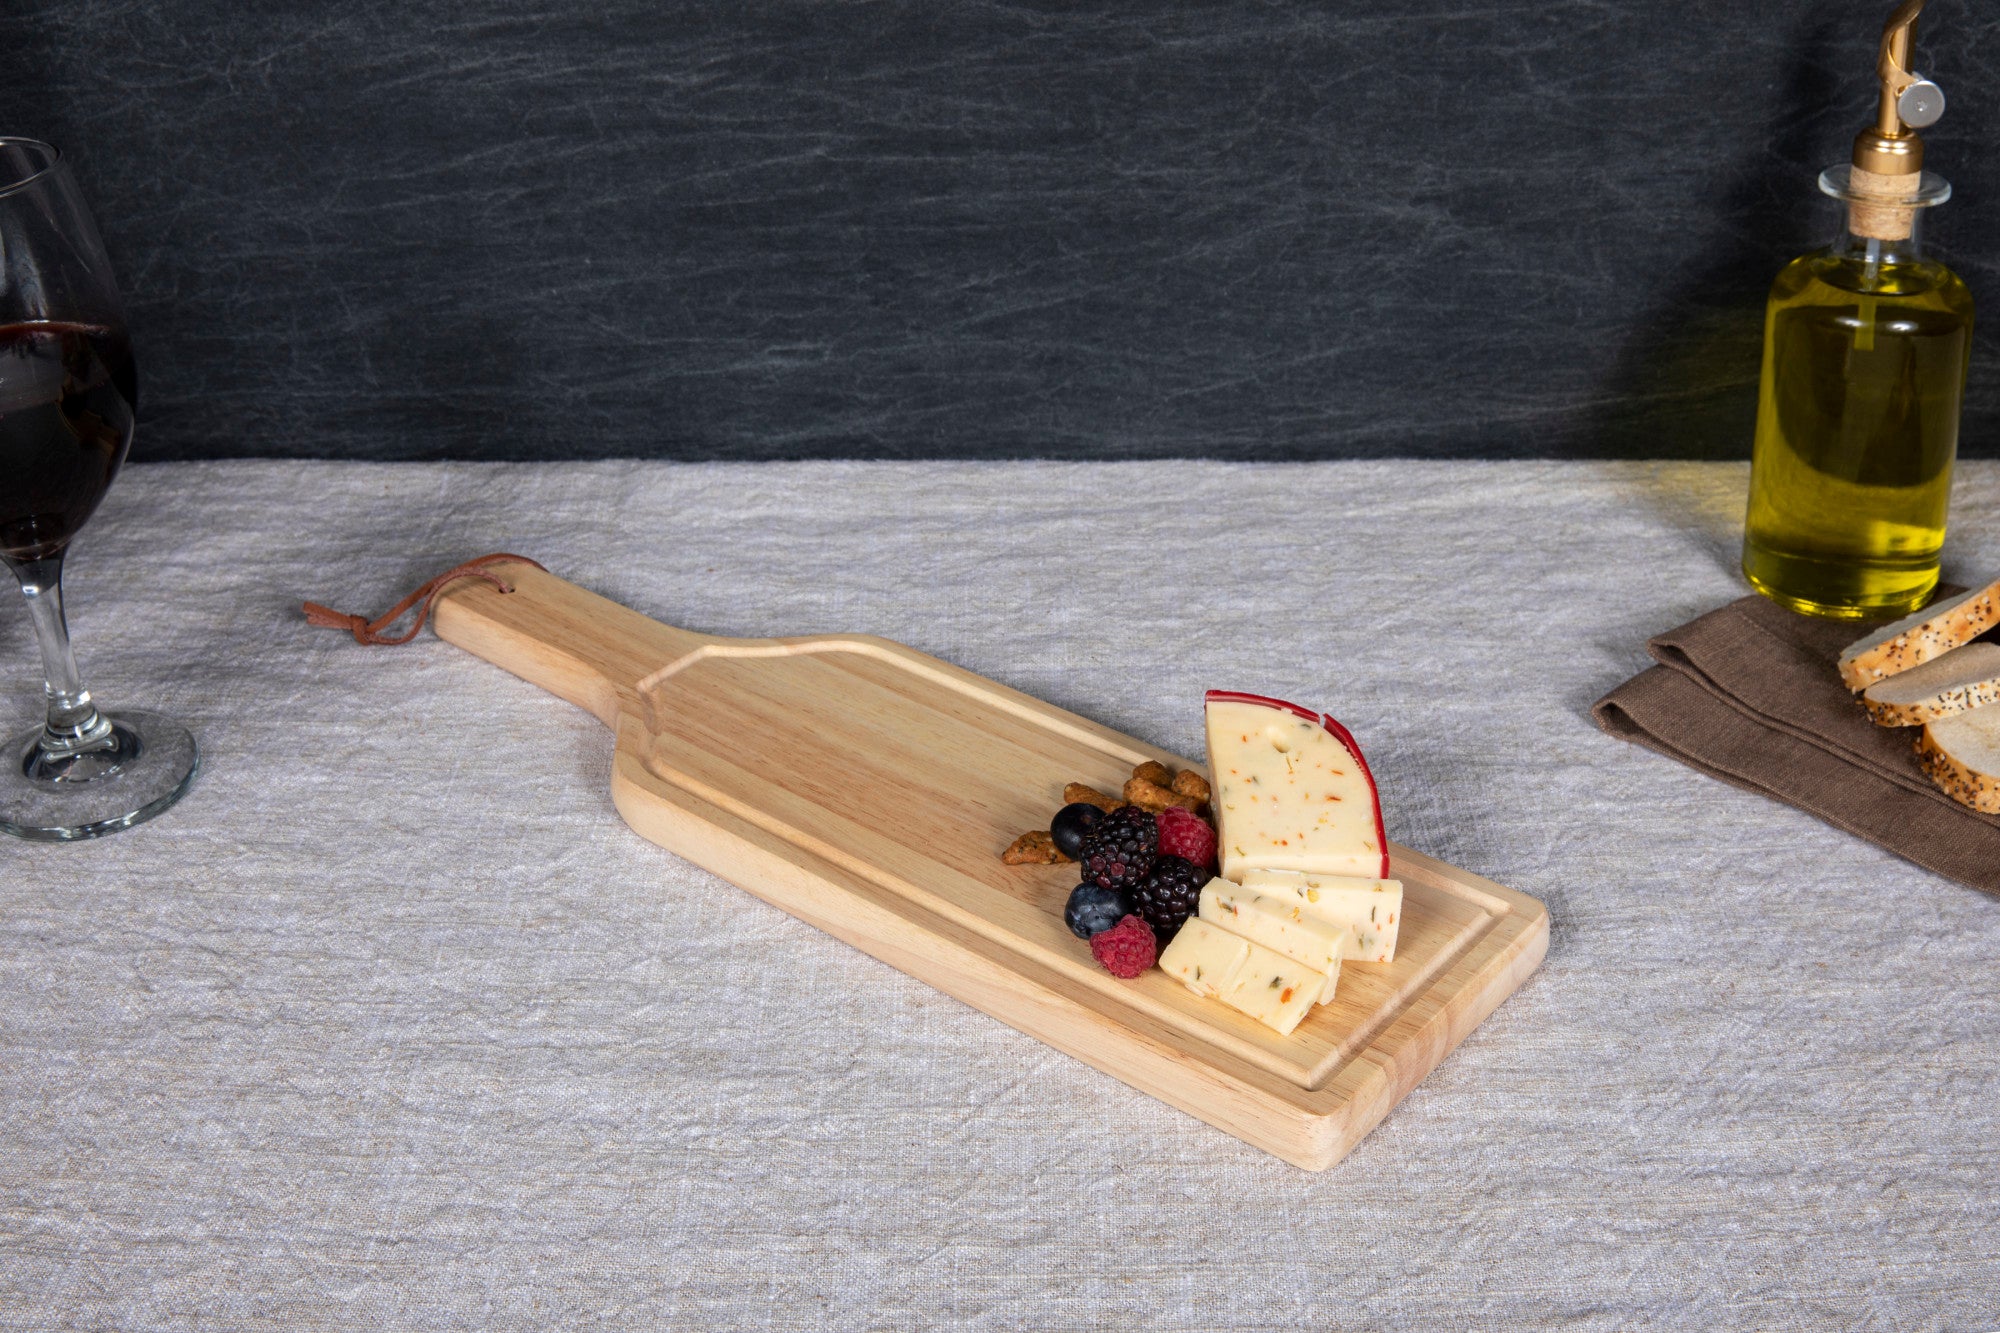 Tampa Bay Buccaneers - Botella Cheese Cutting Board & Serving Tray